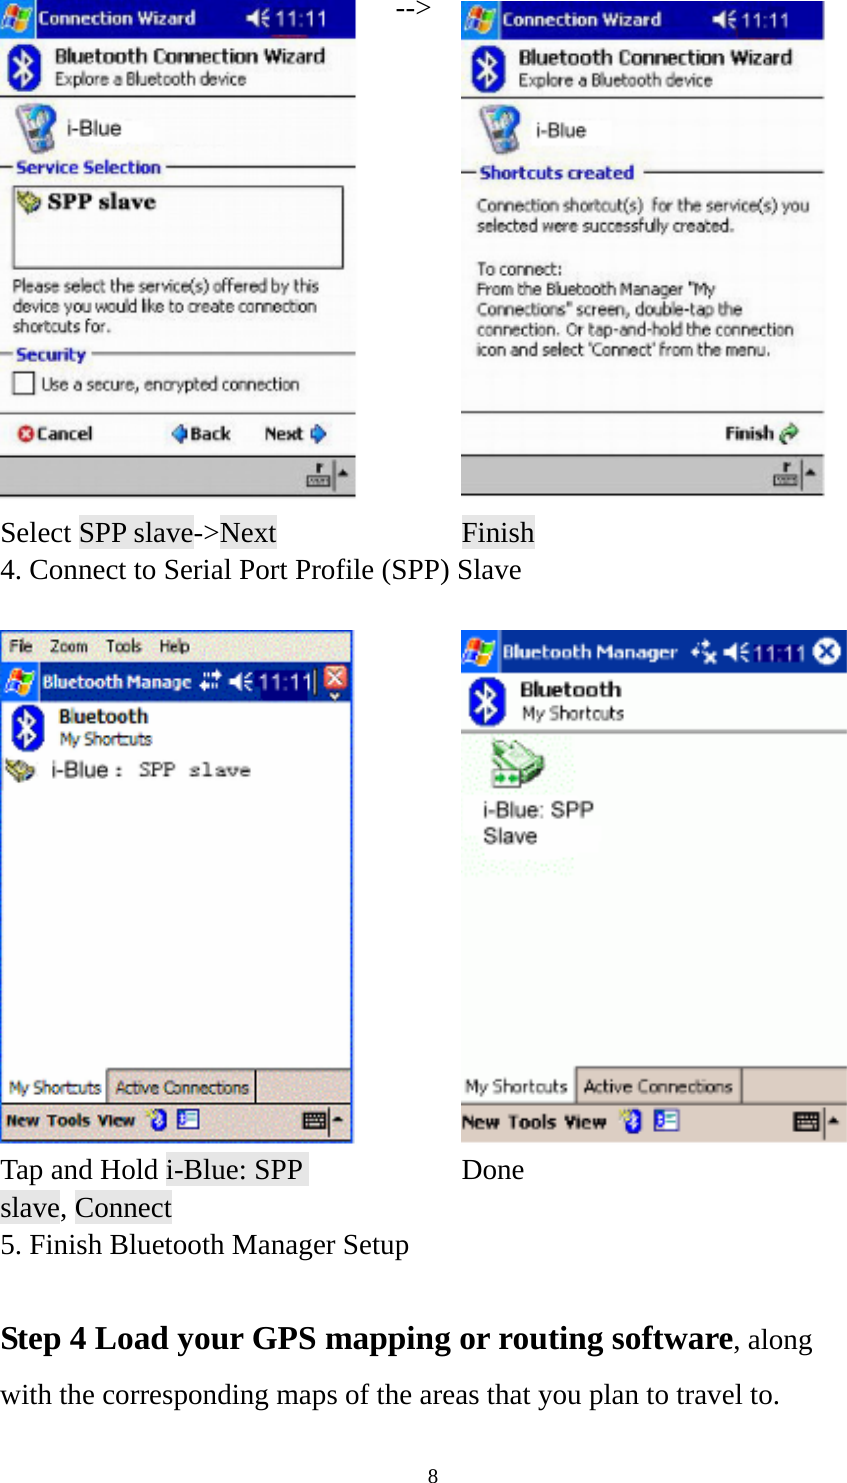  8 --&gt; Select SPP slave-&gt;Next      Finish 4. Connect to Serial Port Profile (SPP) Slave     Tap and Hold i-Blue: SPP slave, Connect  Done 5. Finish Bluetooth Manager Setup  Step 4 Load your GPS mapping or routing software, along with the corresponding maps of the areas that you plan to travel to. 